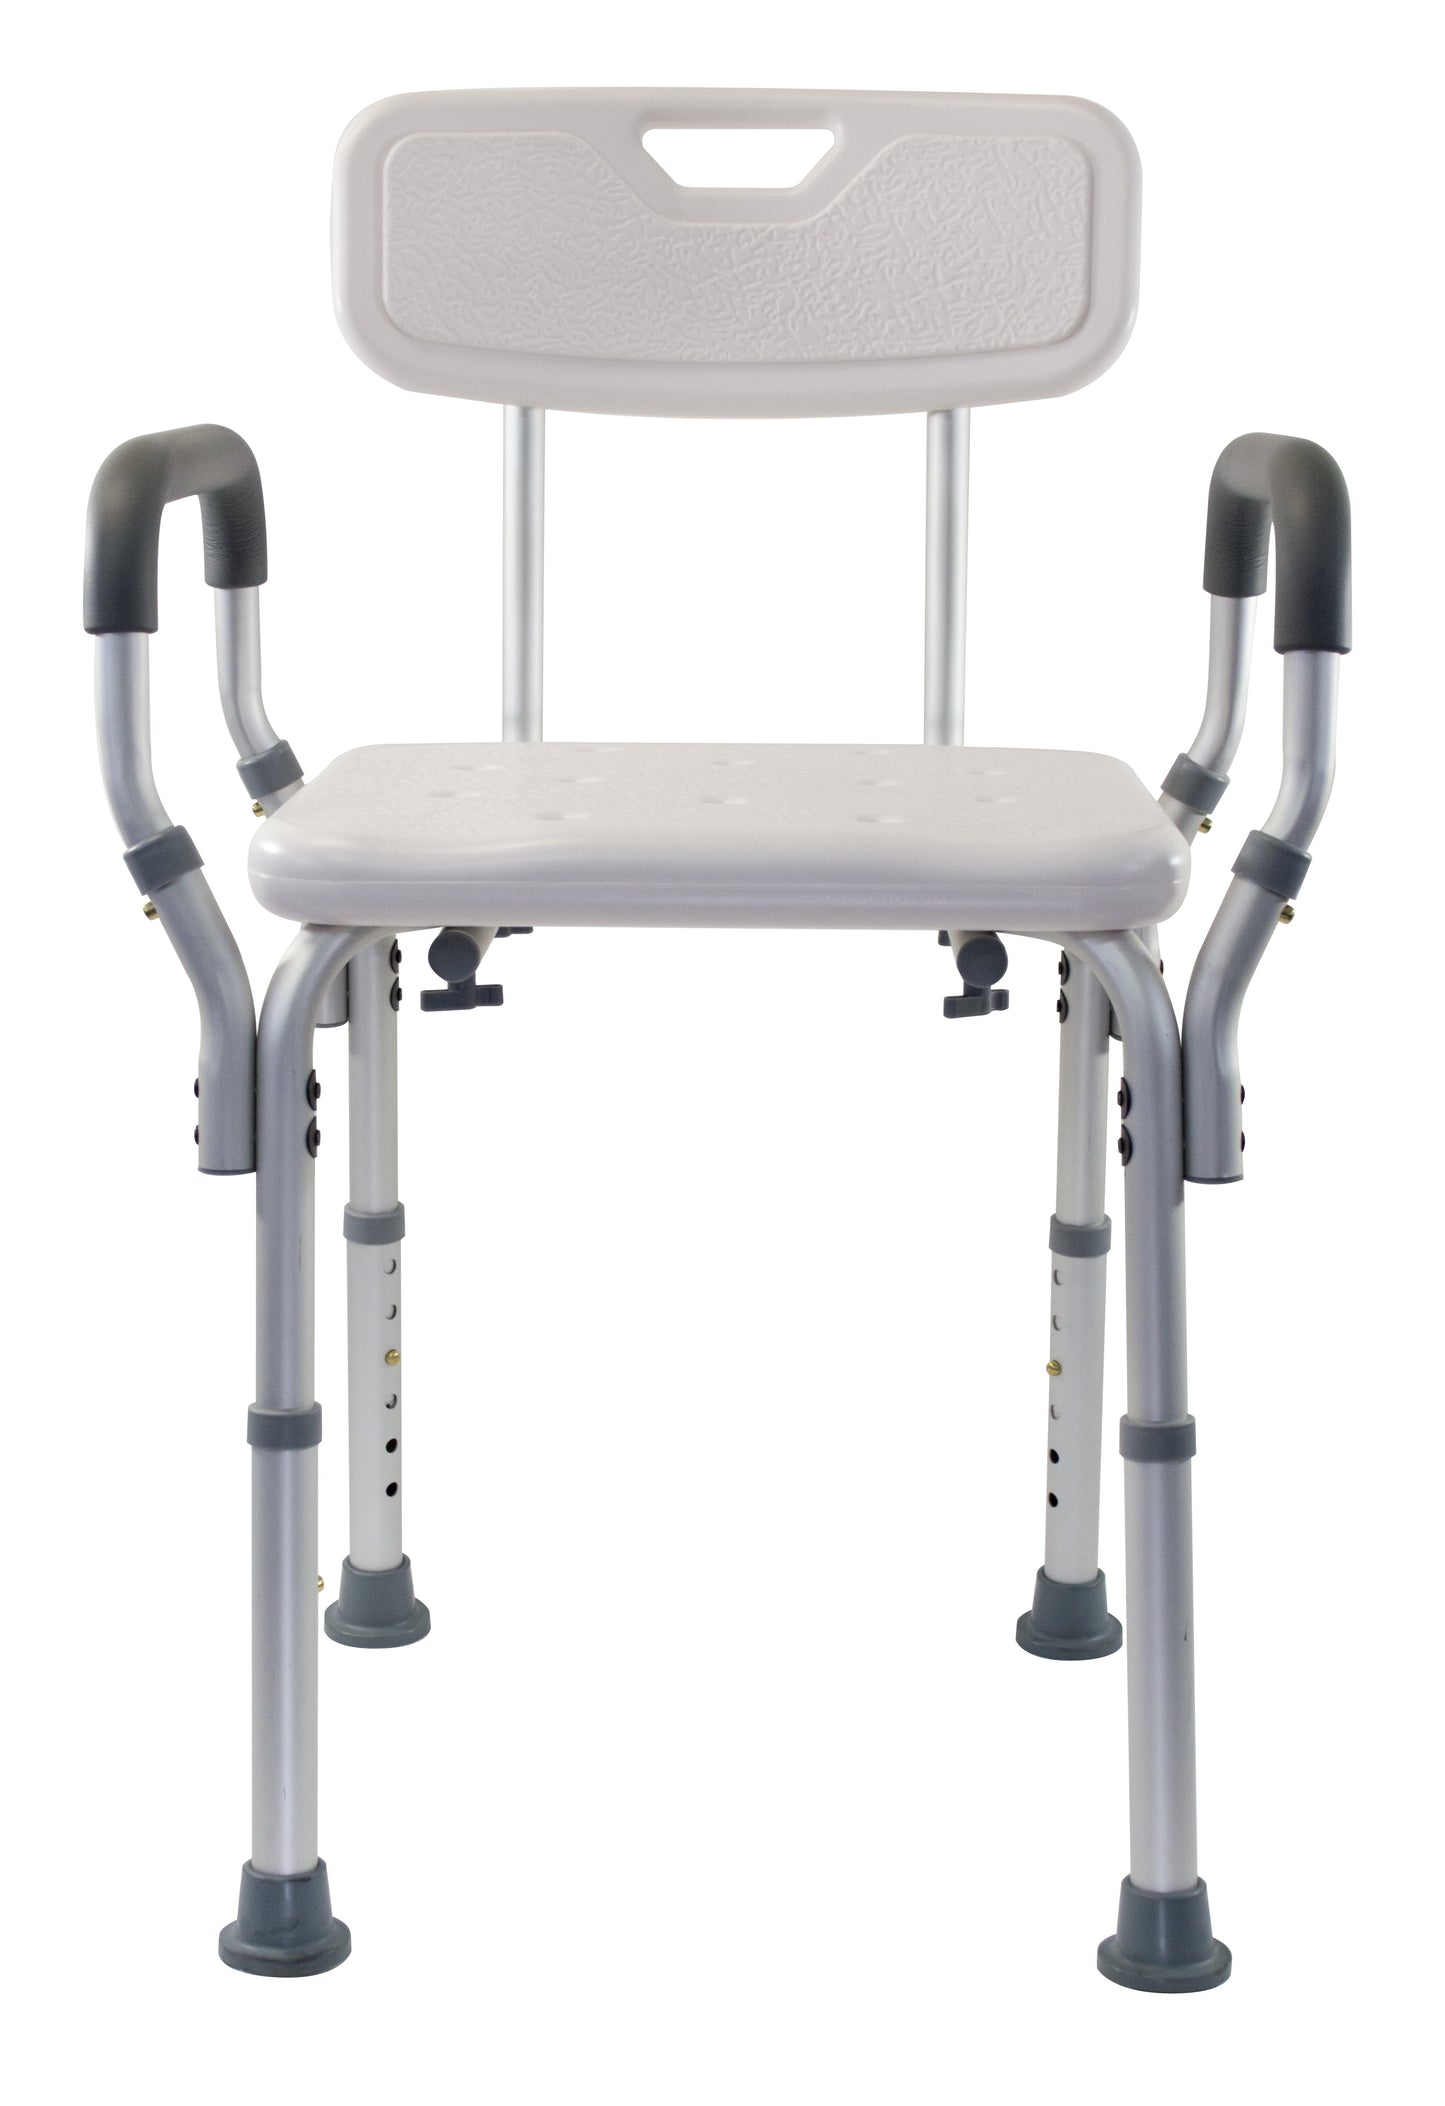 Essential Medical Supply Height Adjustable Molded Shower Chair with Padded Arms & Back- KatyMedSolutions